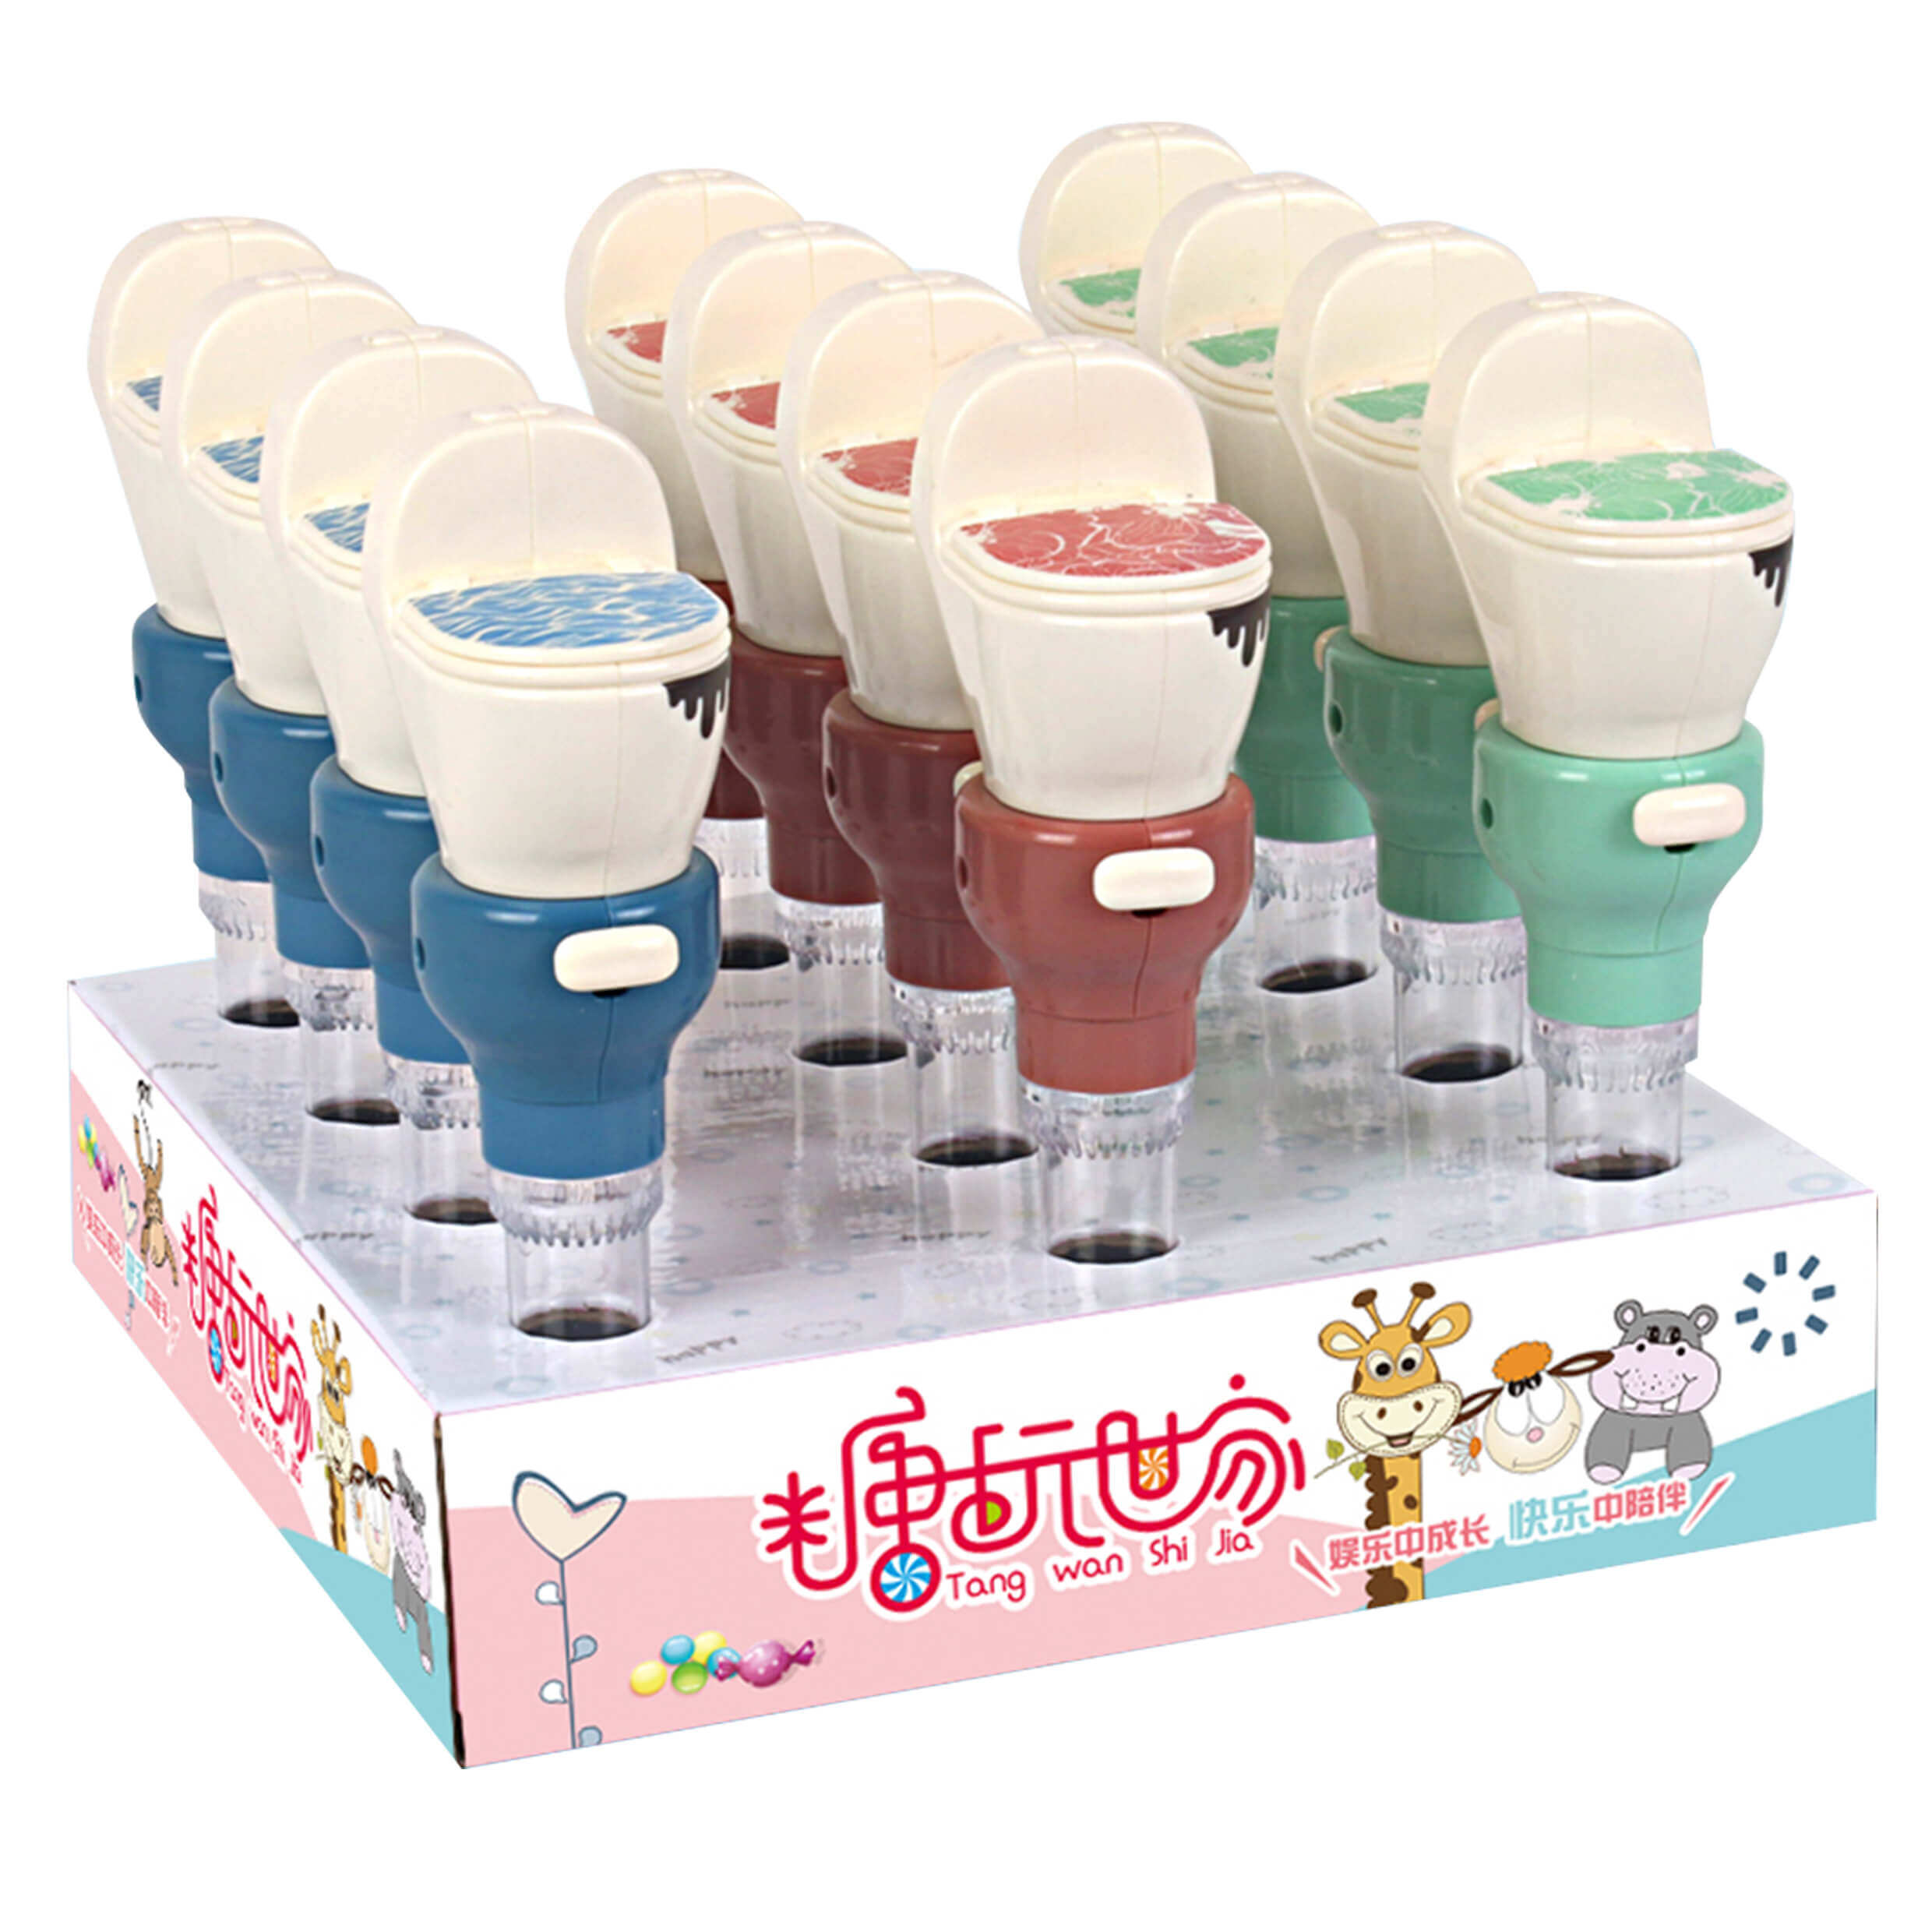 toilet toy candy, toy candy maker, toy candy manufacturers